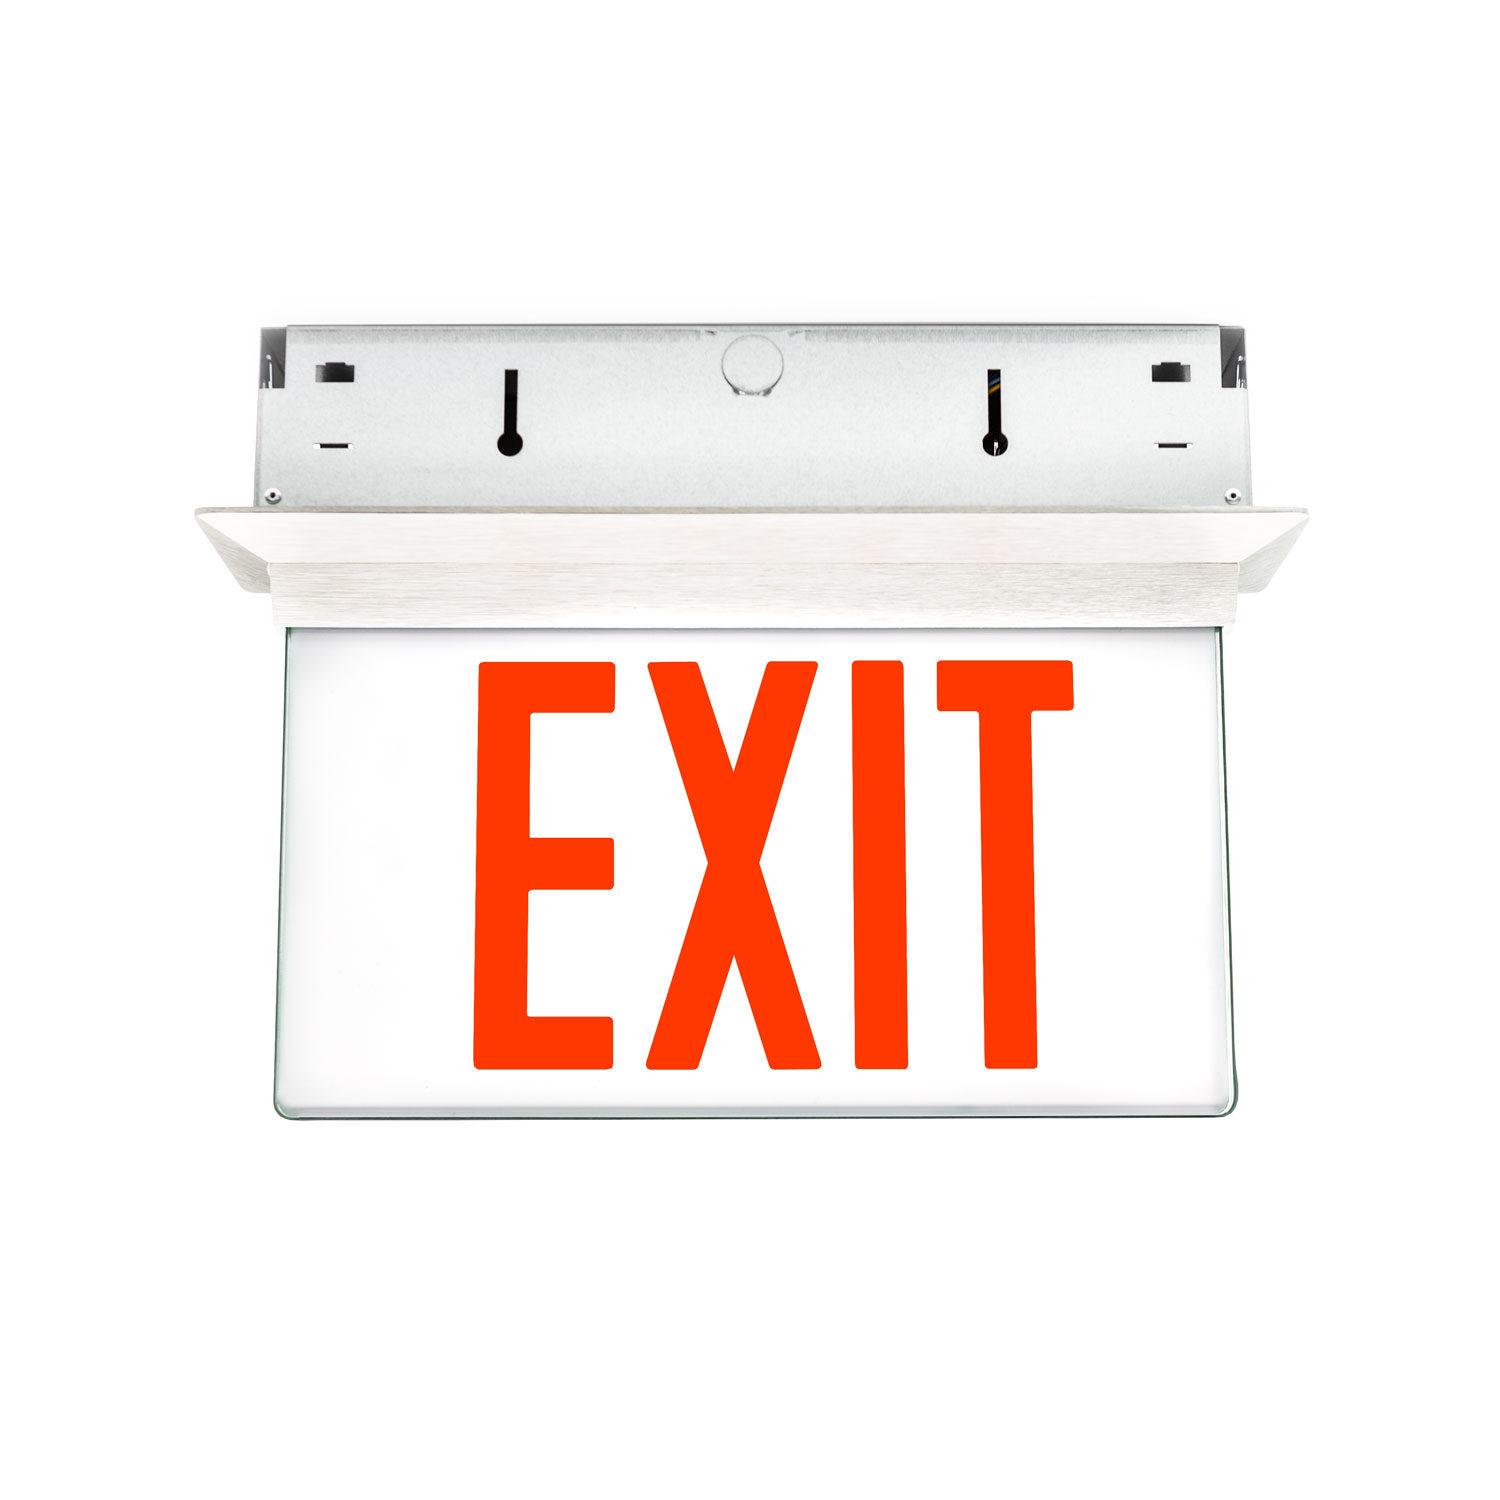 Elite Edge-Lit Exit Sign with a low profile recessed housing unit that is suitable for old or new work installations. The Isolite ELT.